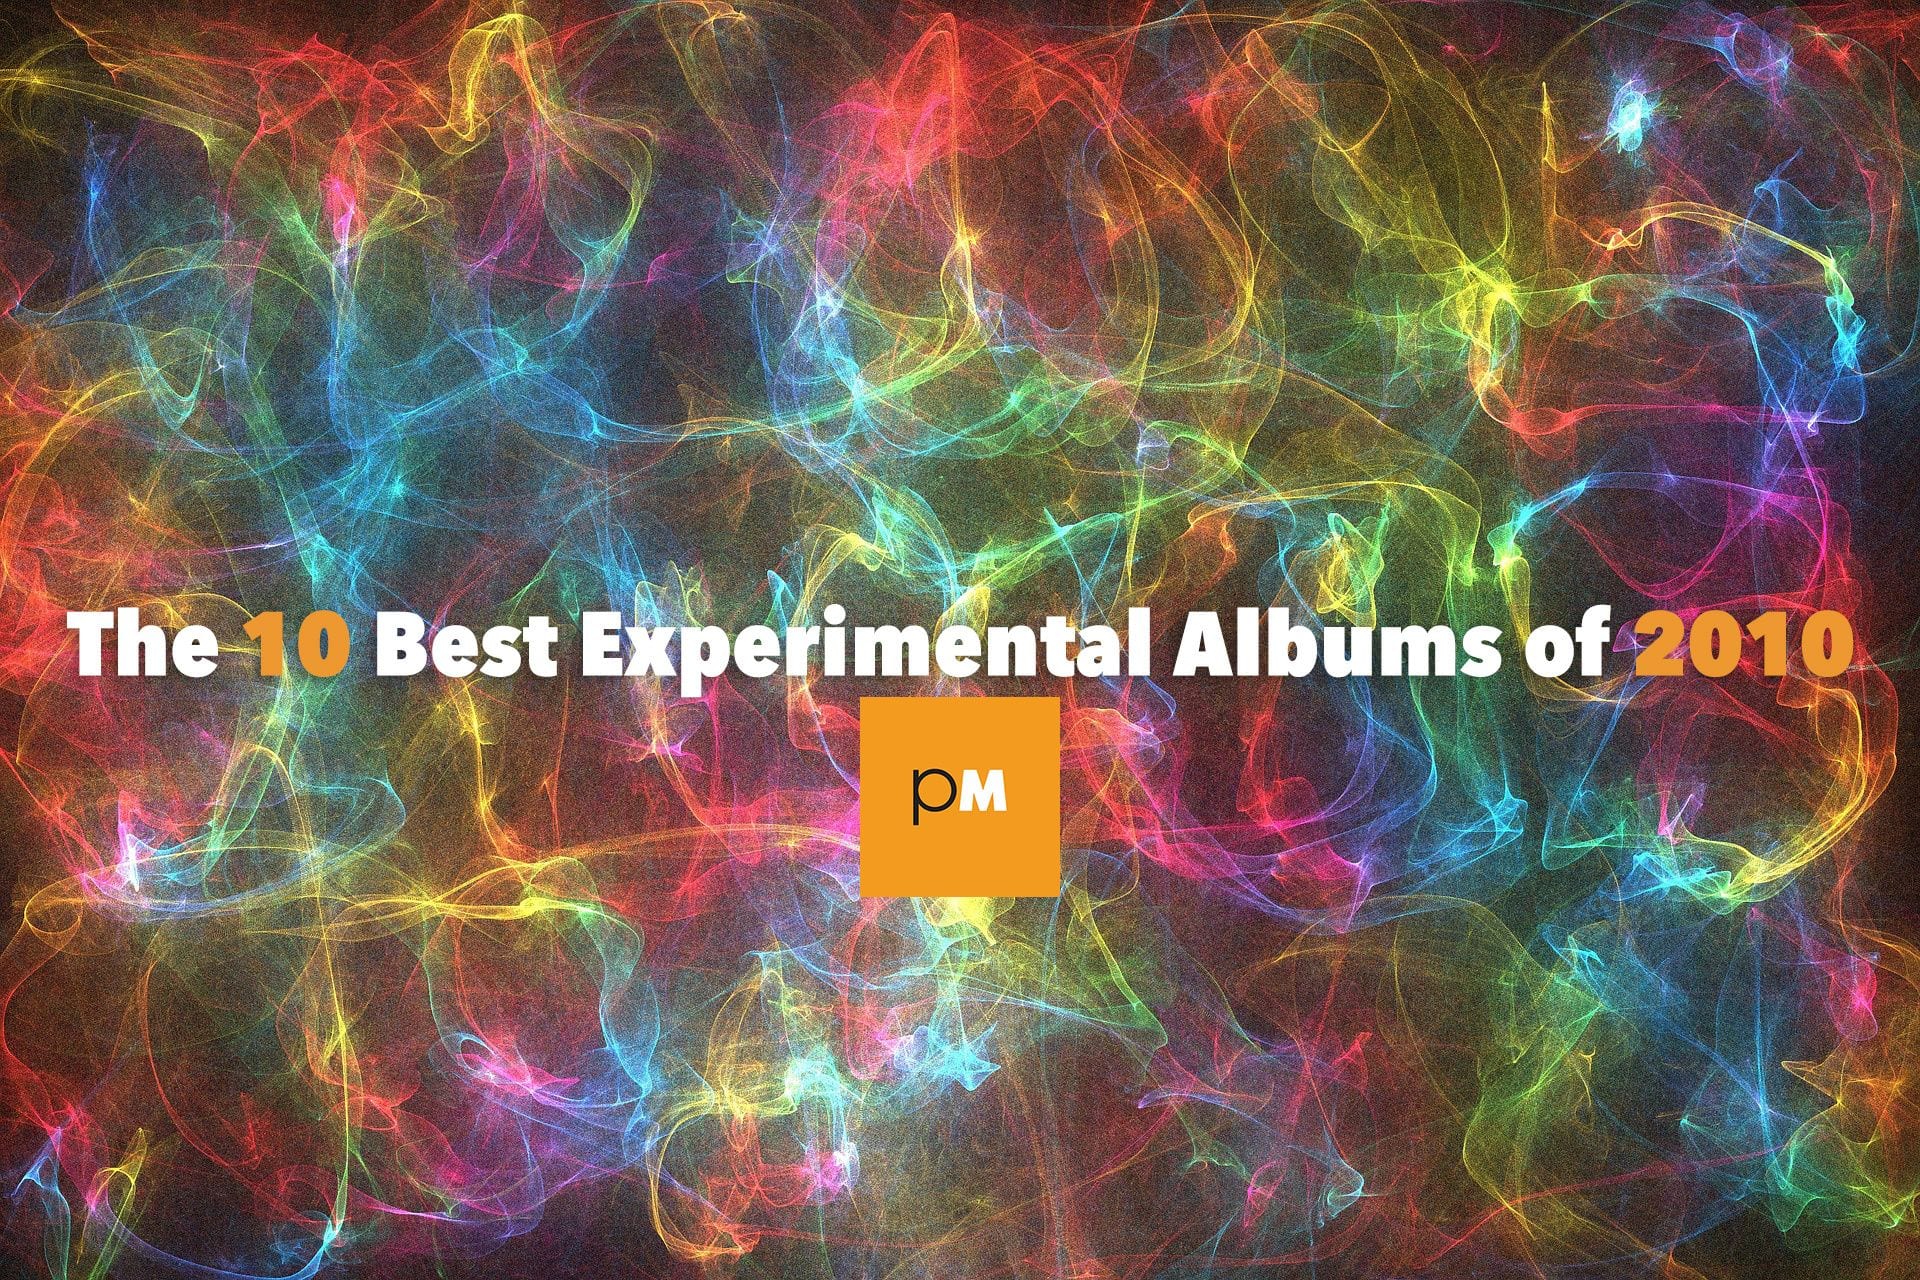 The 10 Best Experimental “Albums” of 2010